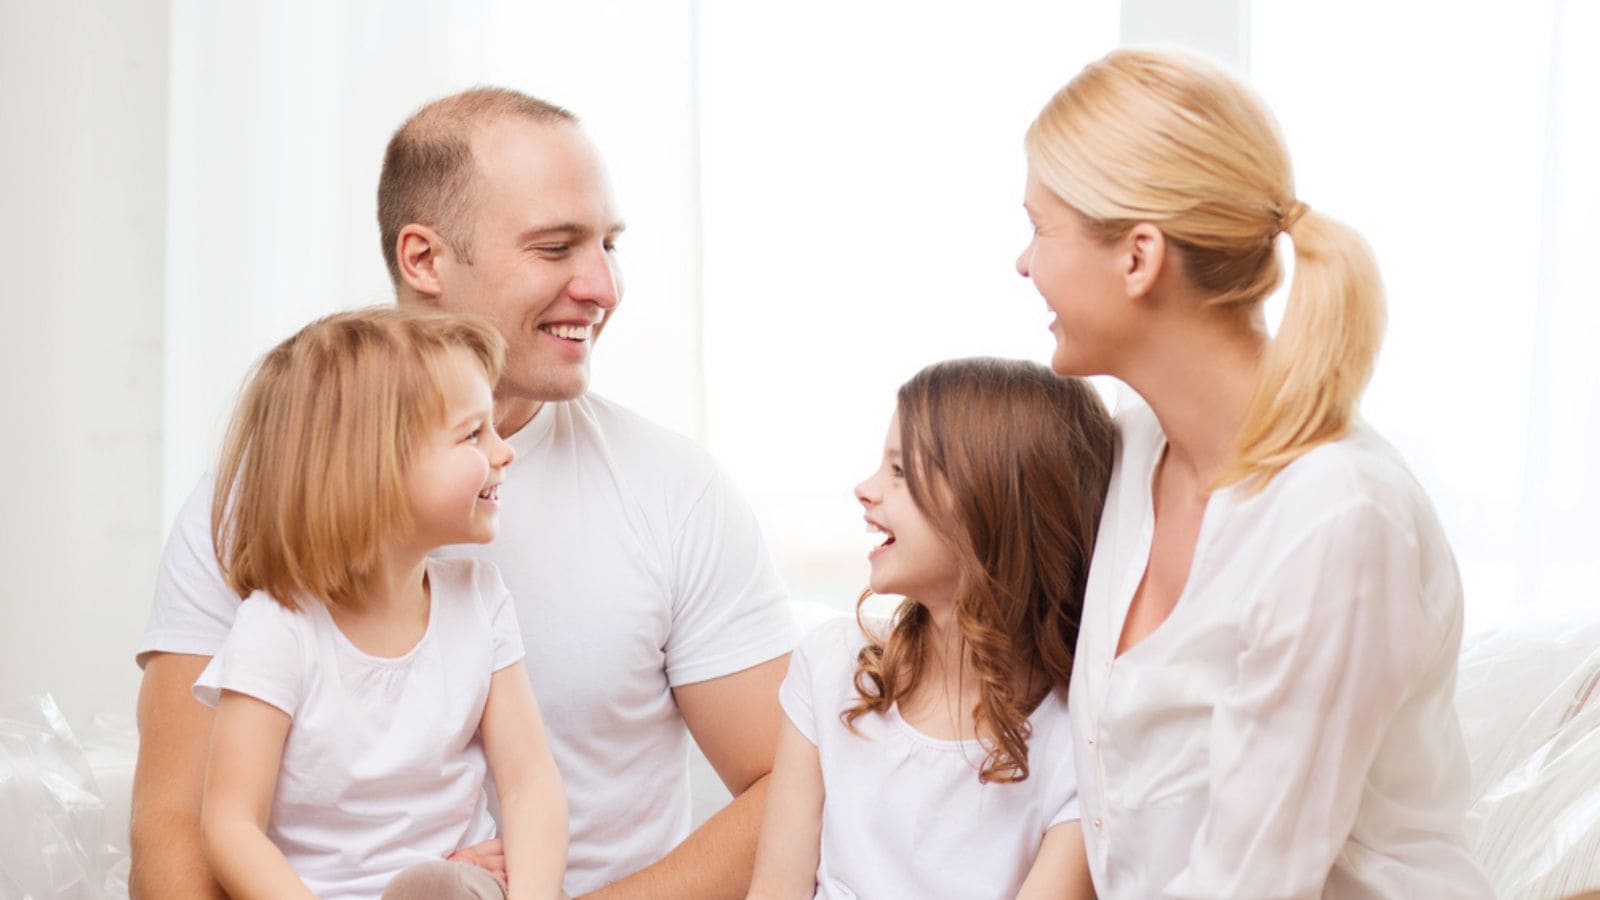 Smiling family with two little girls at home